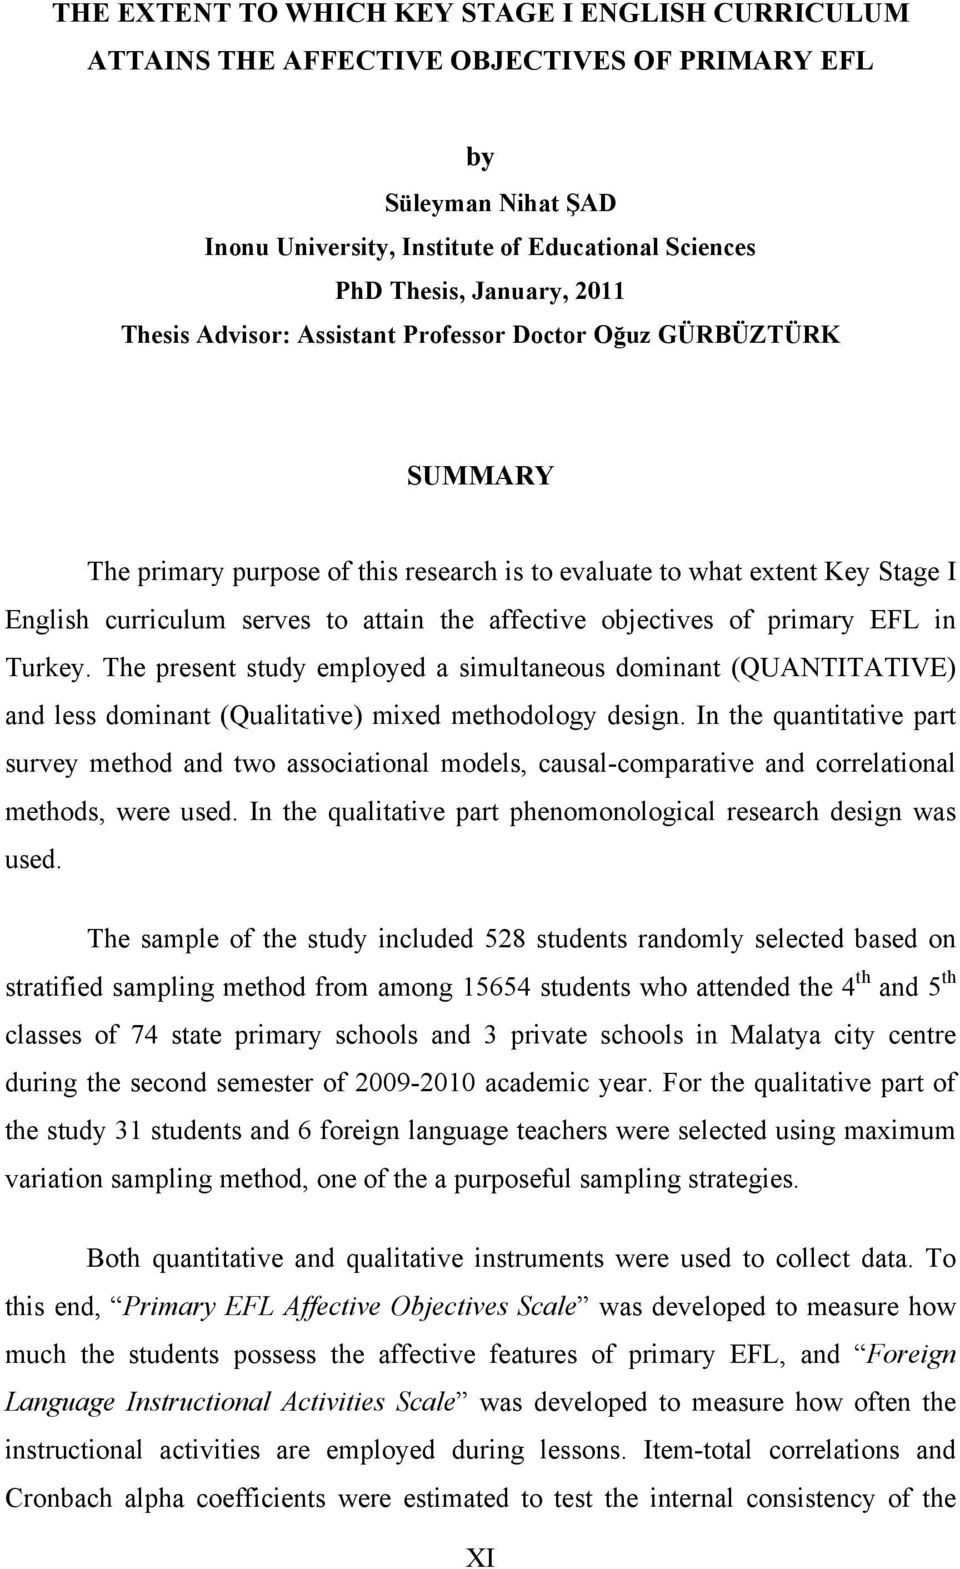 objectives of primary EFL in Turkey. The present study employed a simultaneous dominant (QUANTITATIVE) and less dominant (Qualitative) mixed methodology design.